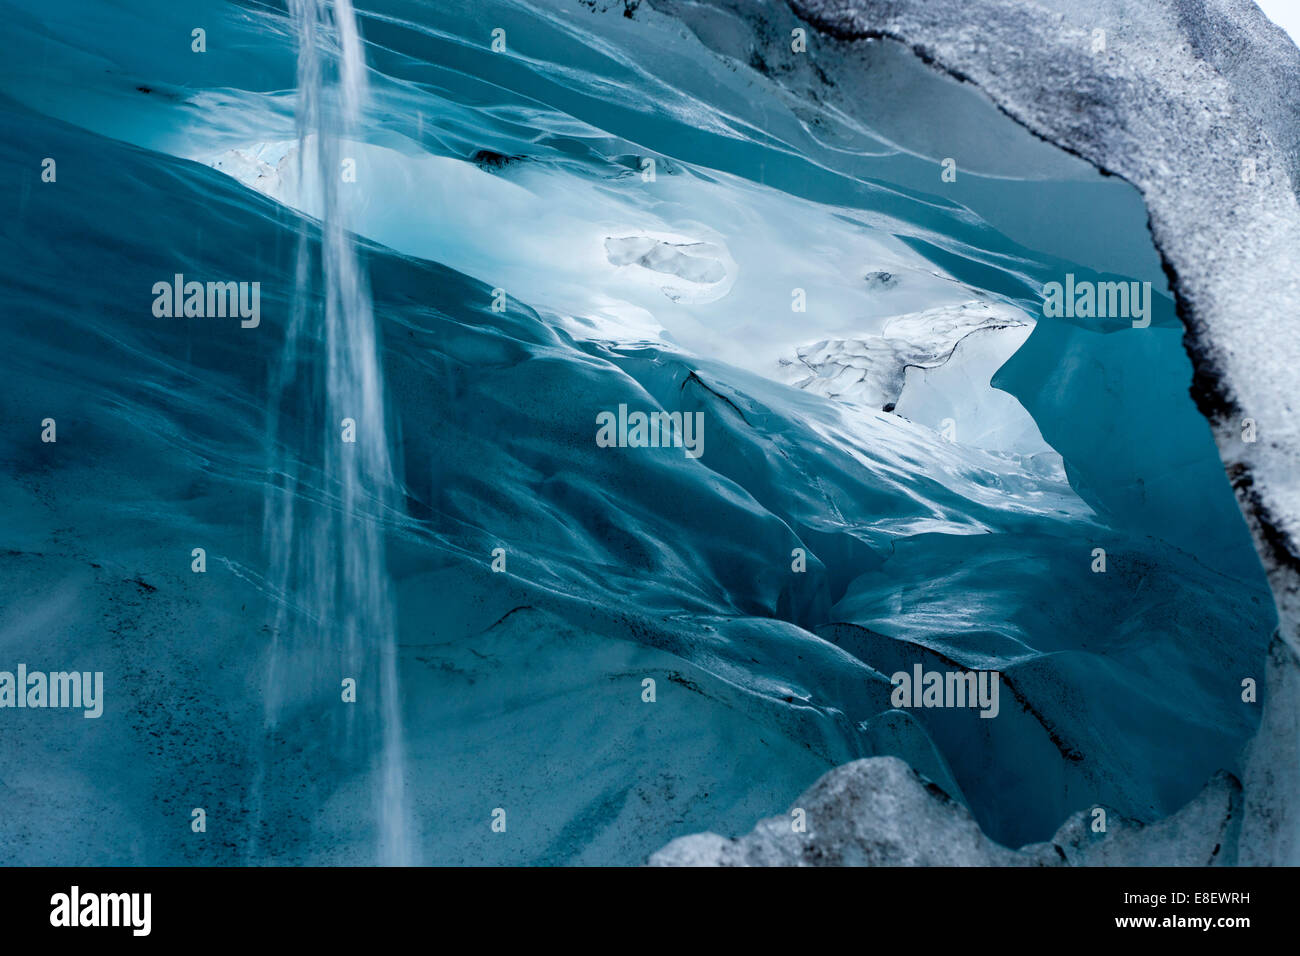 View into a blue-green ice cave with condensation water draining off, Skaftafell Glacier, Iceland Stock Photo